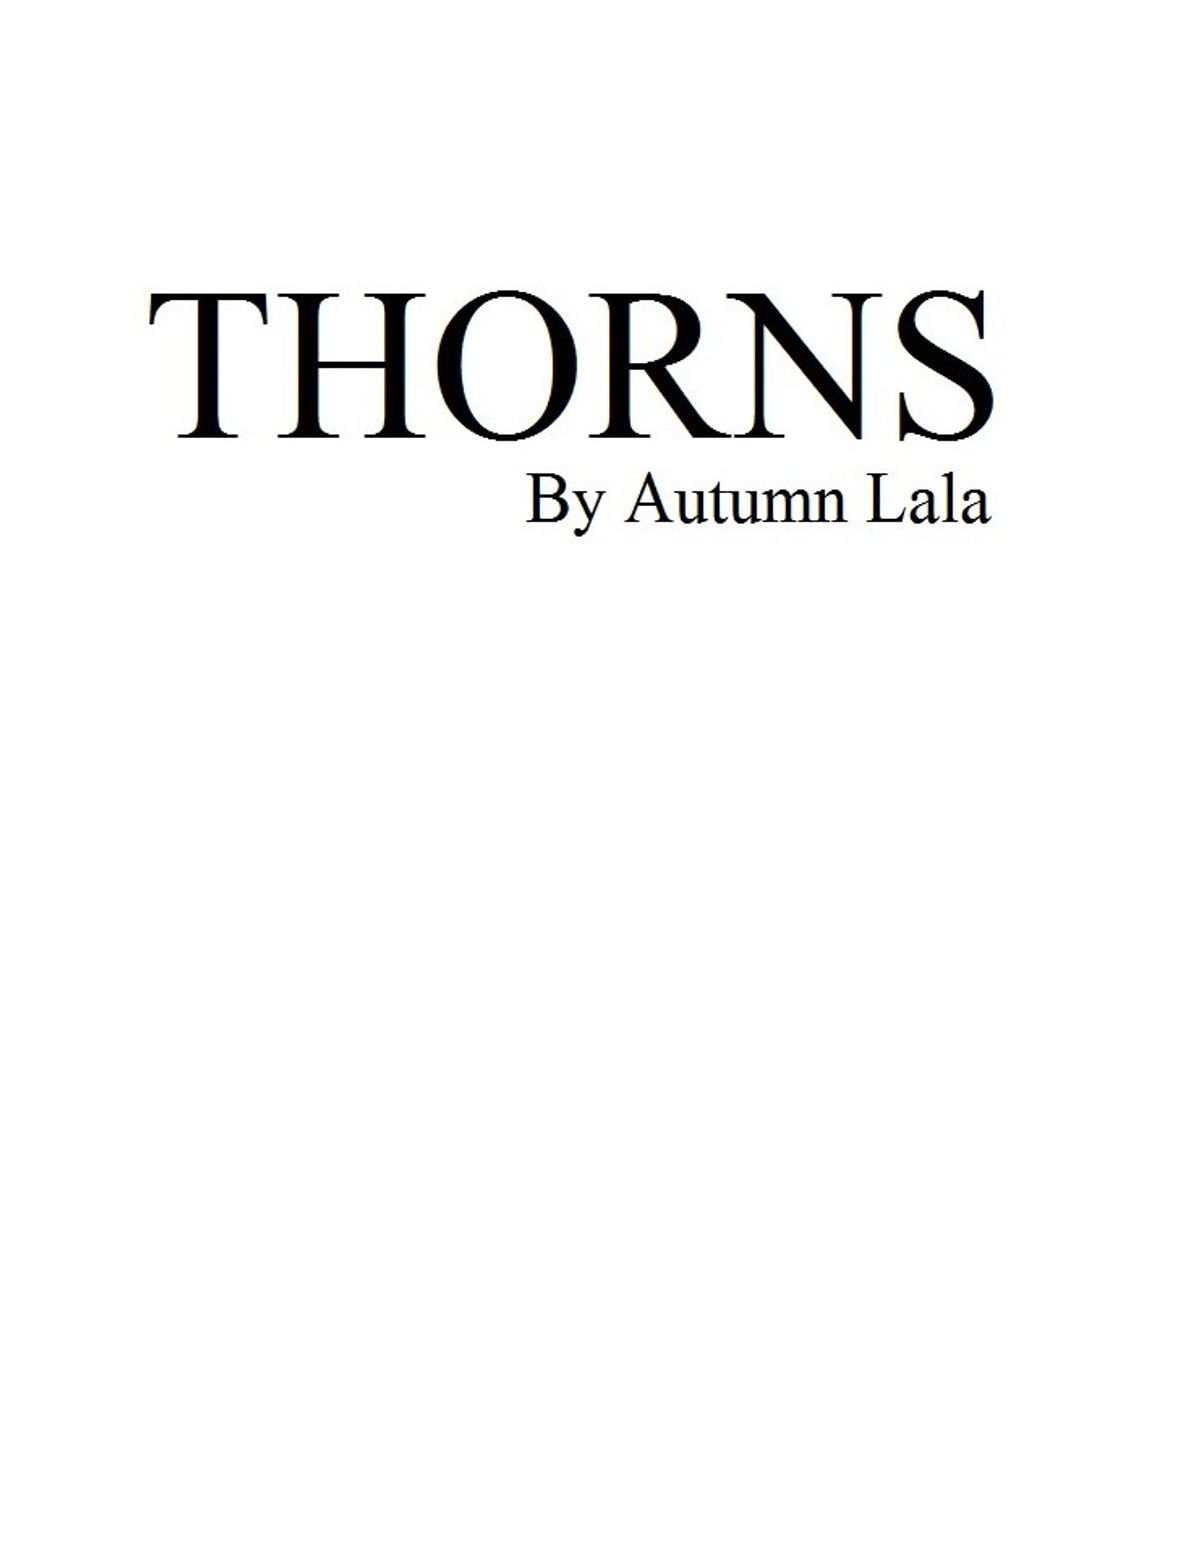 "Thorns" By Autumn Lala